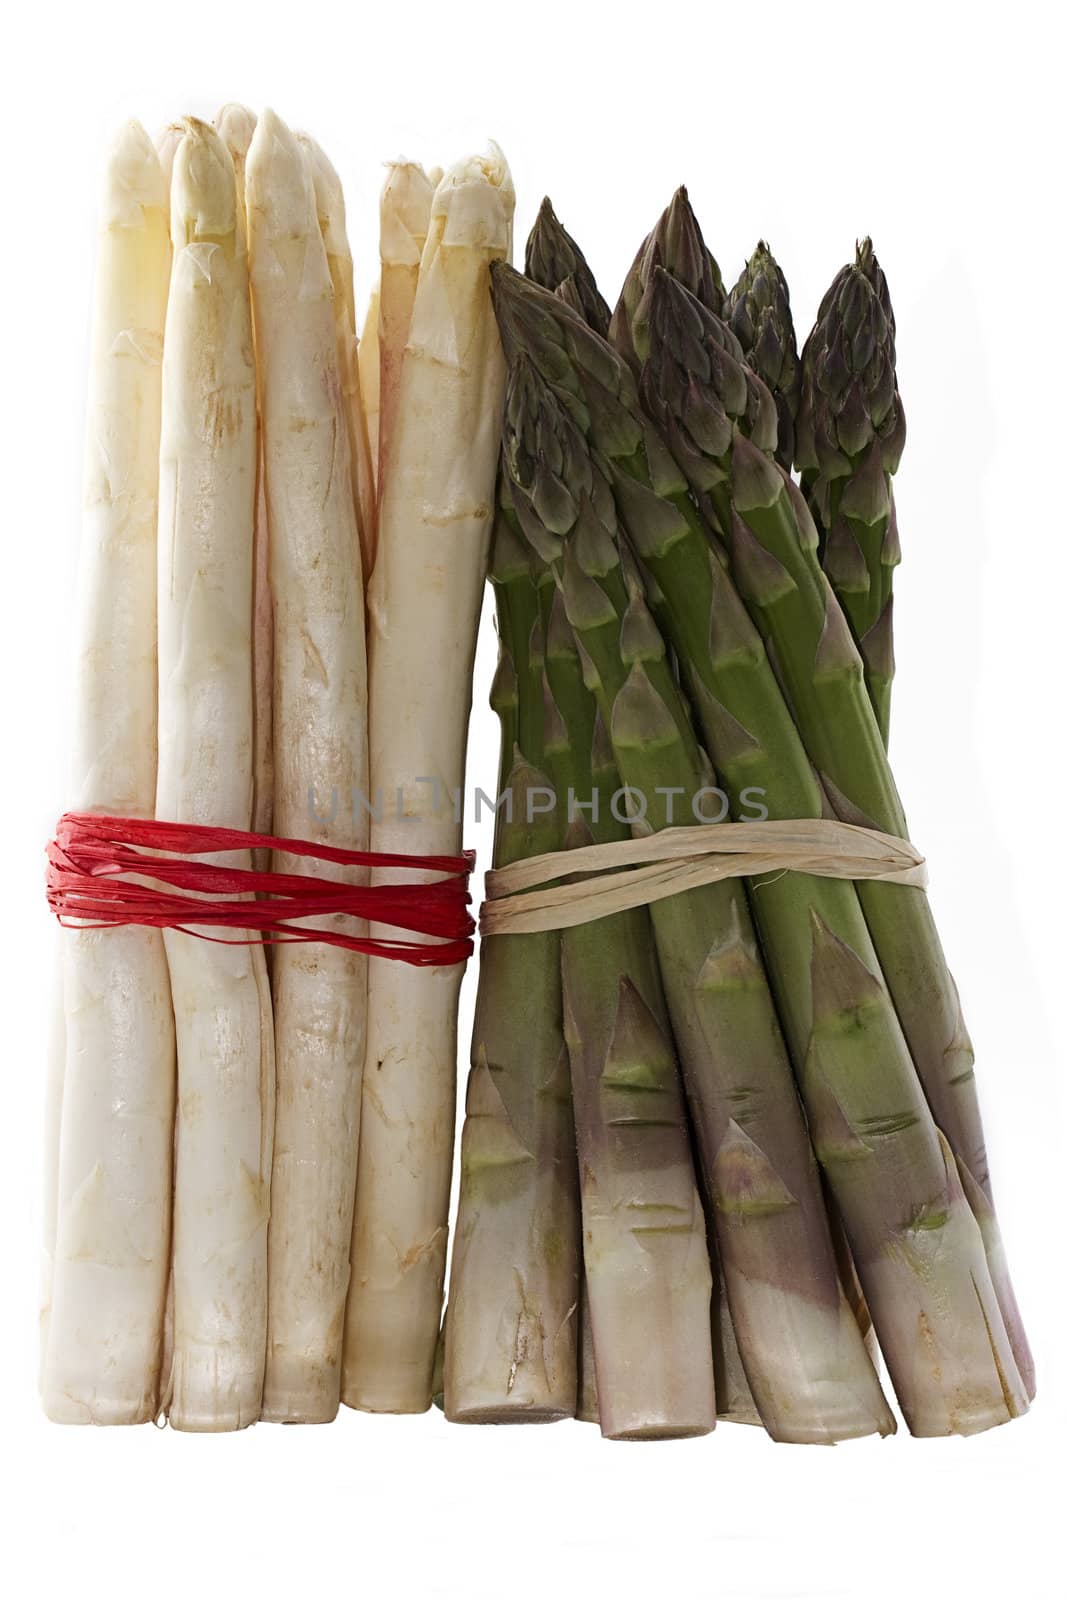 green and white asparagus isolated by RobStark